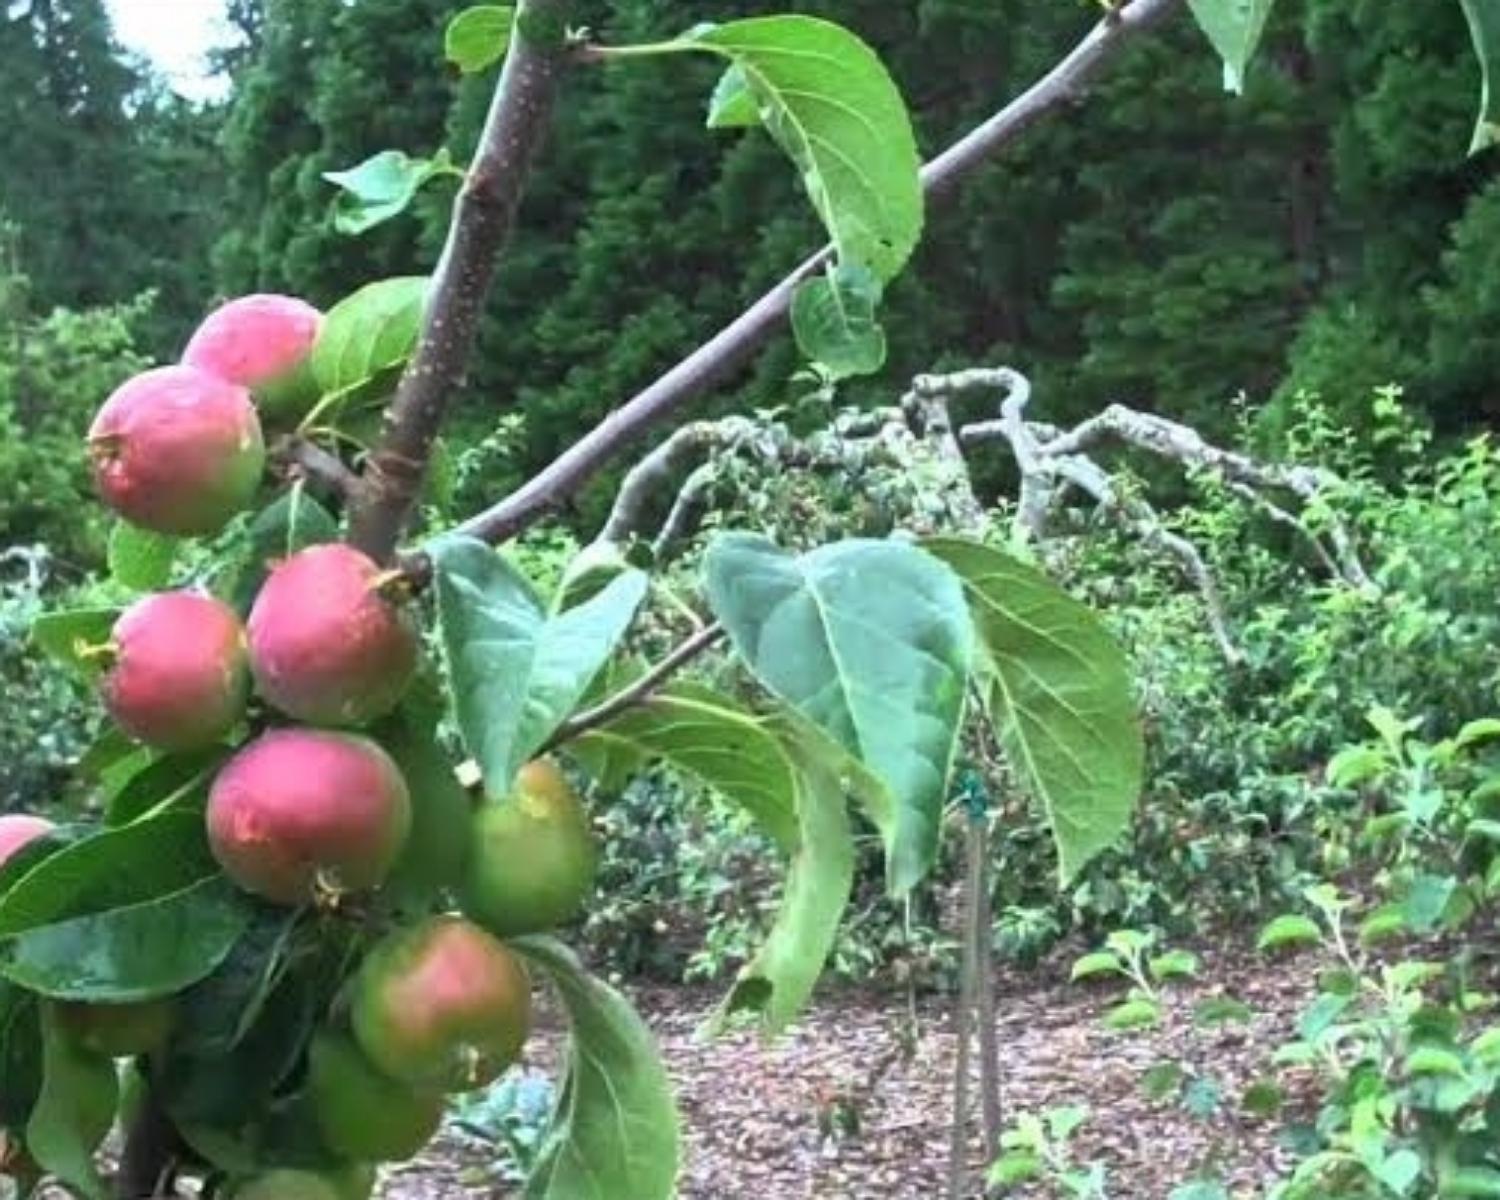 Paul uses raw arborist woodchips in his orchard